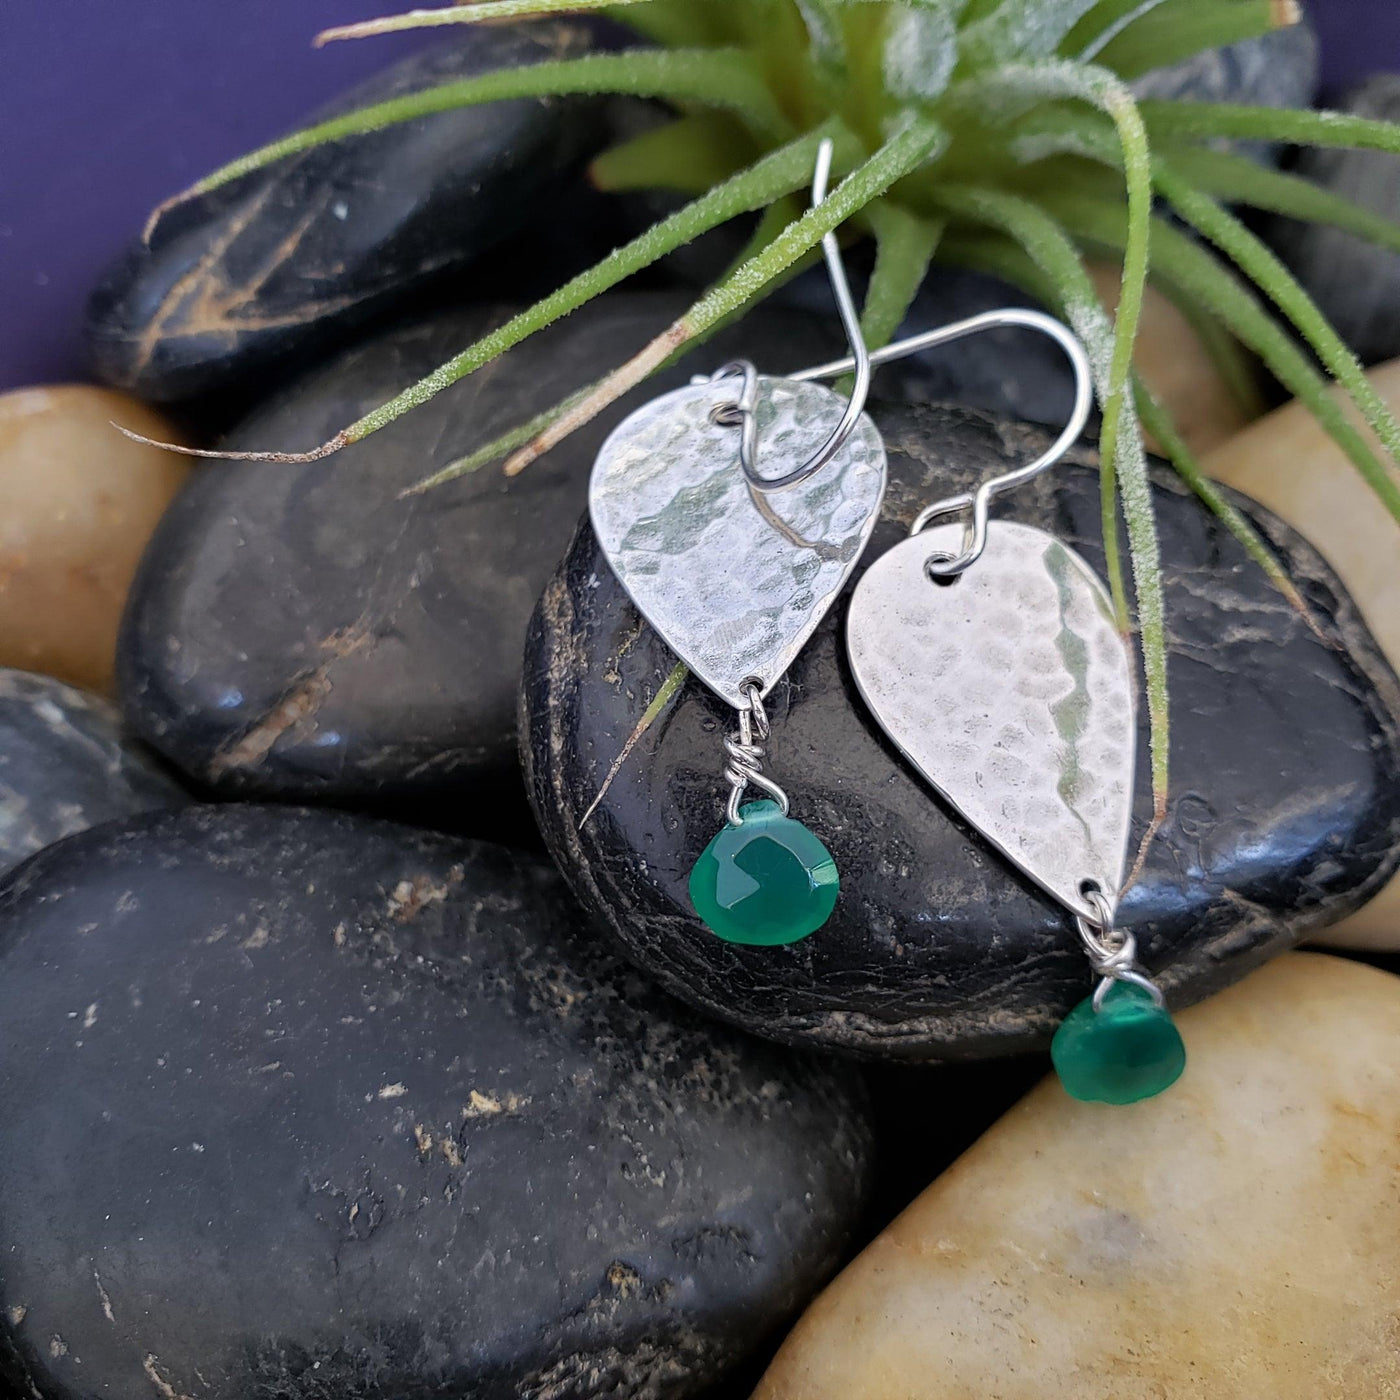 Green onyx and sterling drop earrings